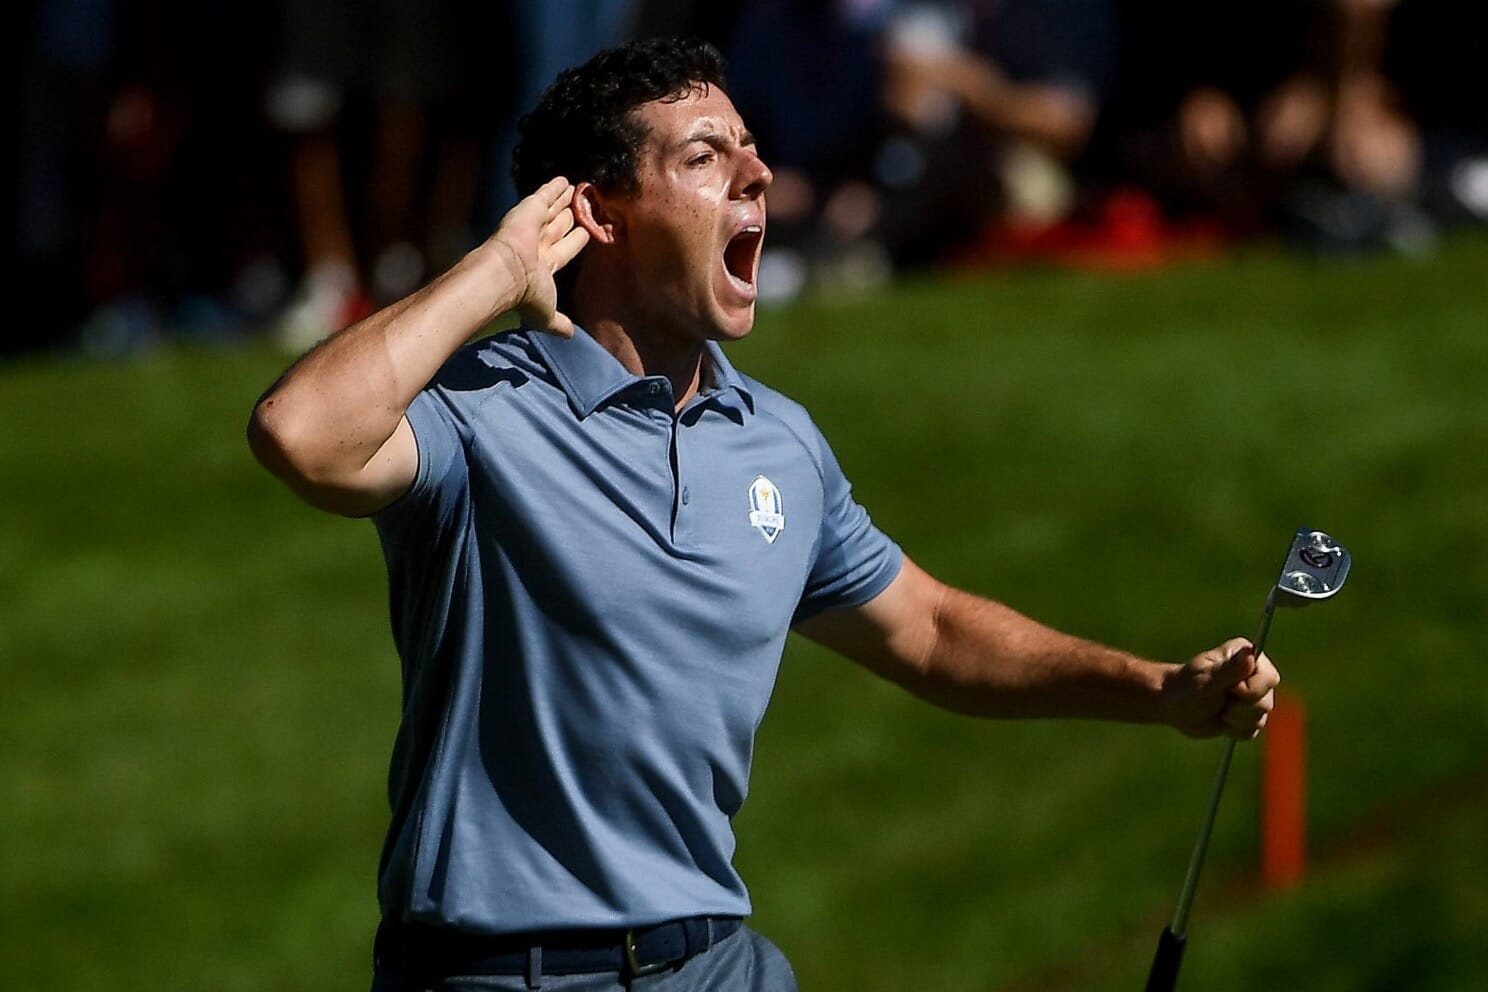 Ryder Cup beats them all for TV sporting entertainment